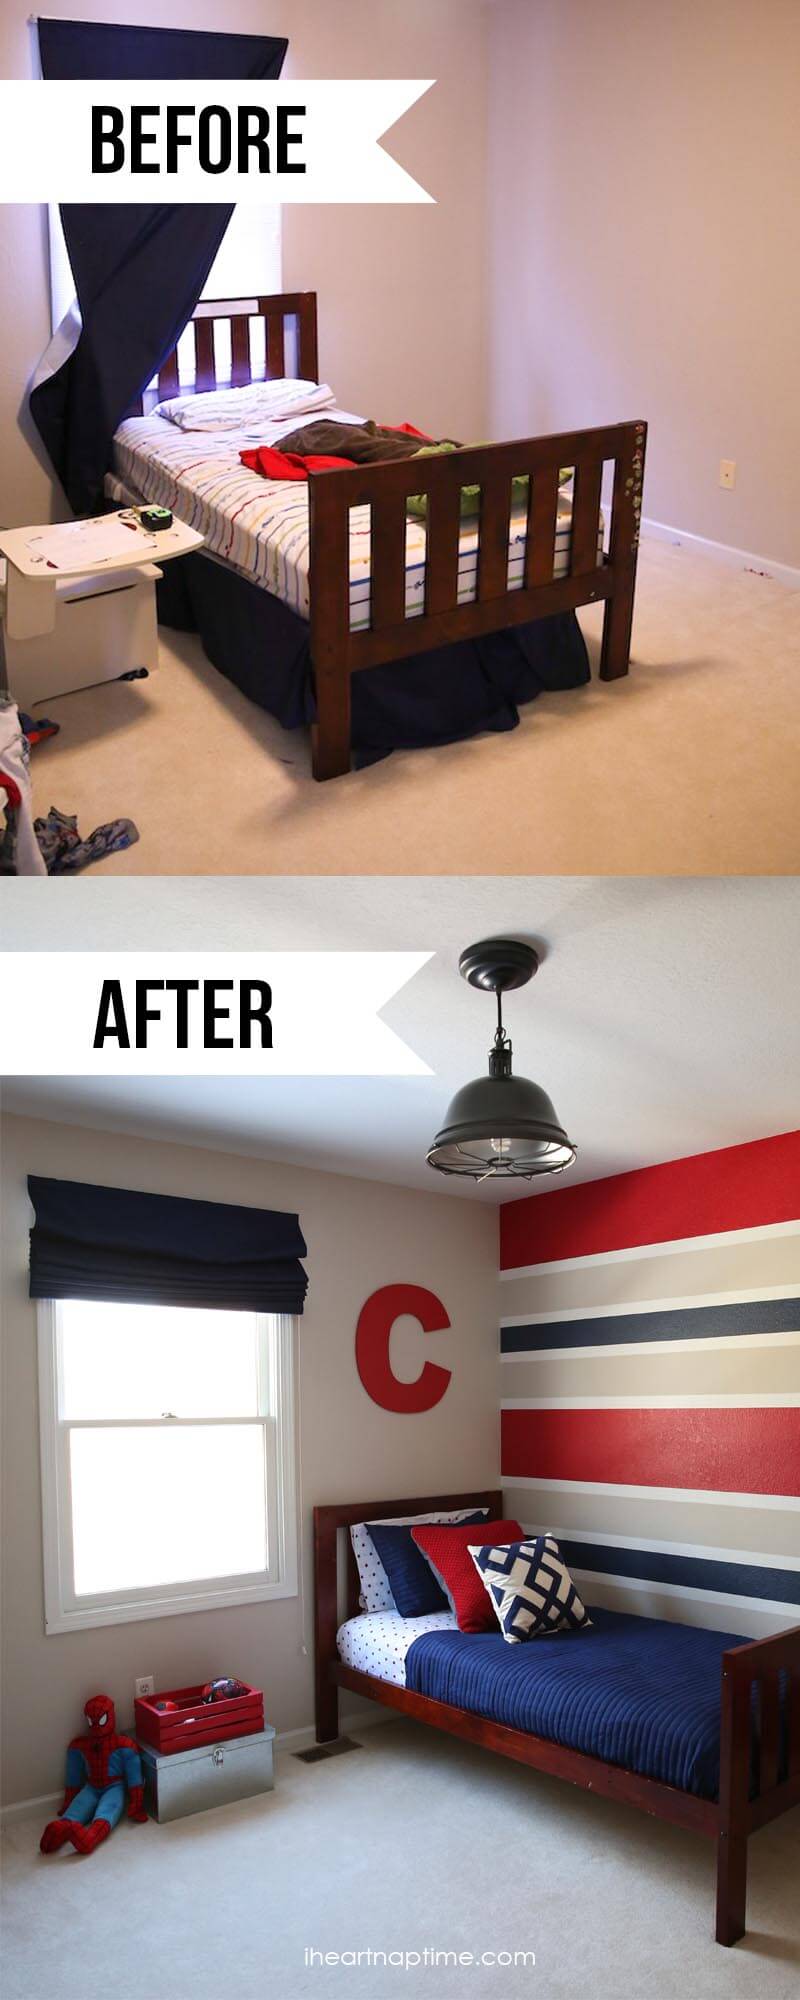 Beforea and after super hero room